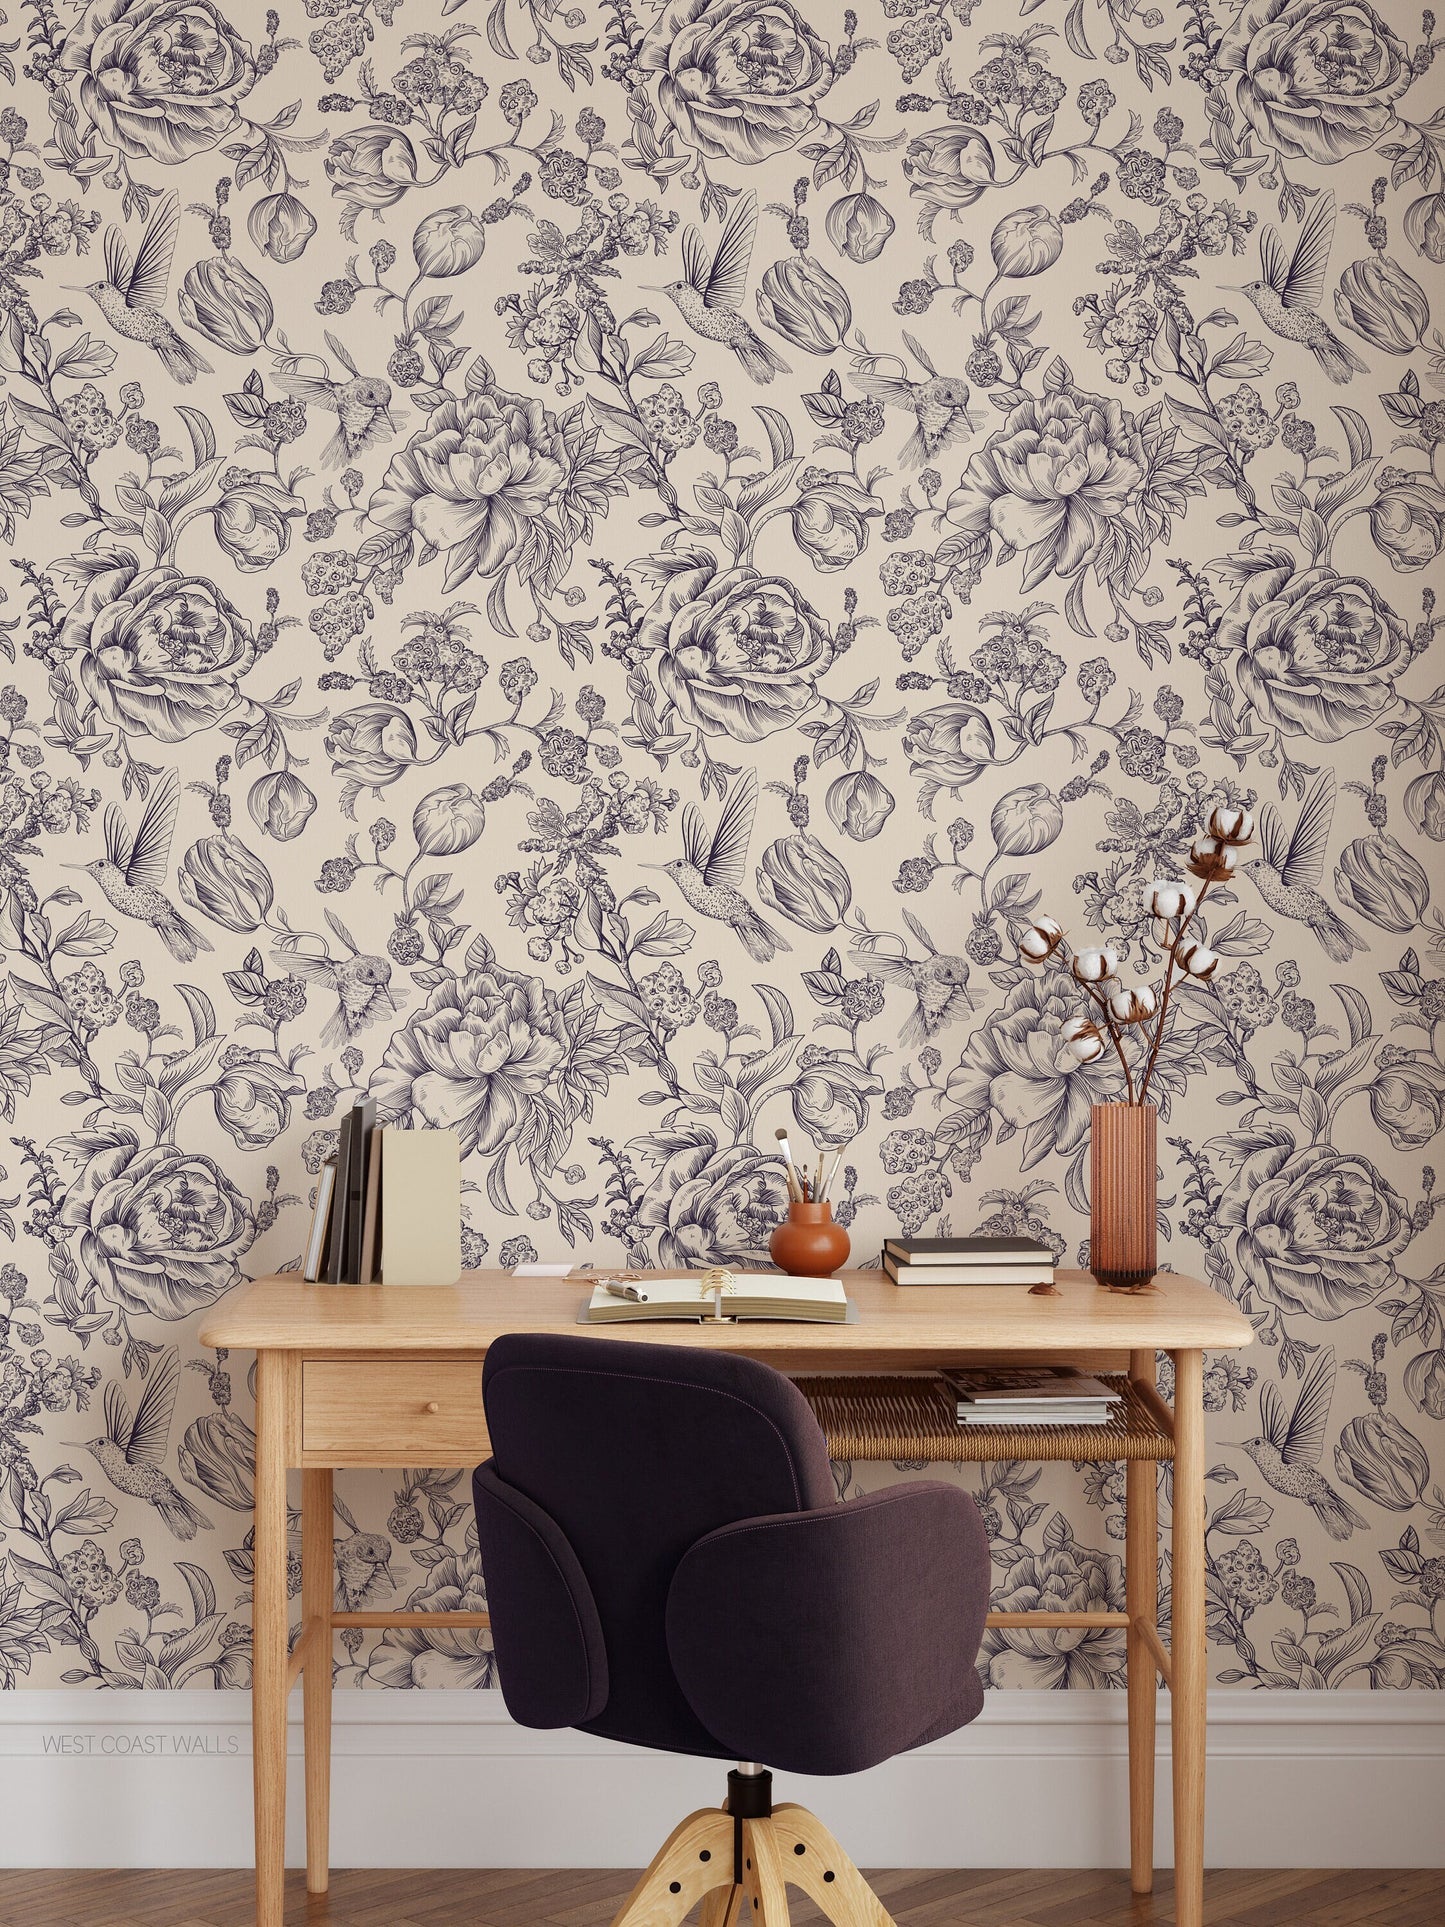 Hummingbird Blooms Wallpaper - Alternate Colours Available / Vintage Floral Design / Floral Feature Wall / Hand Drawn Floral